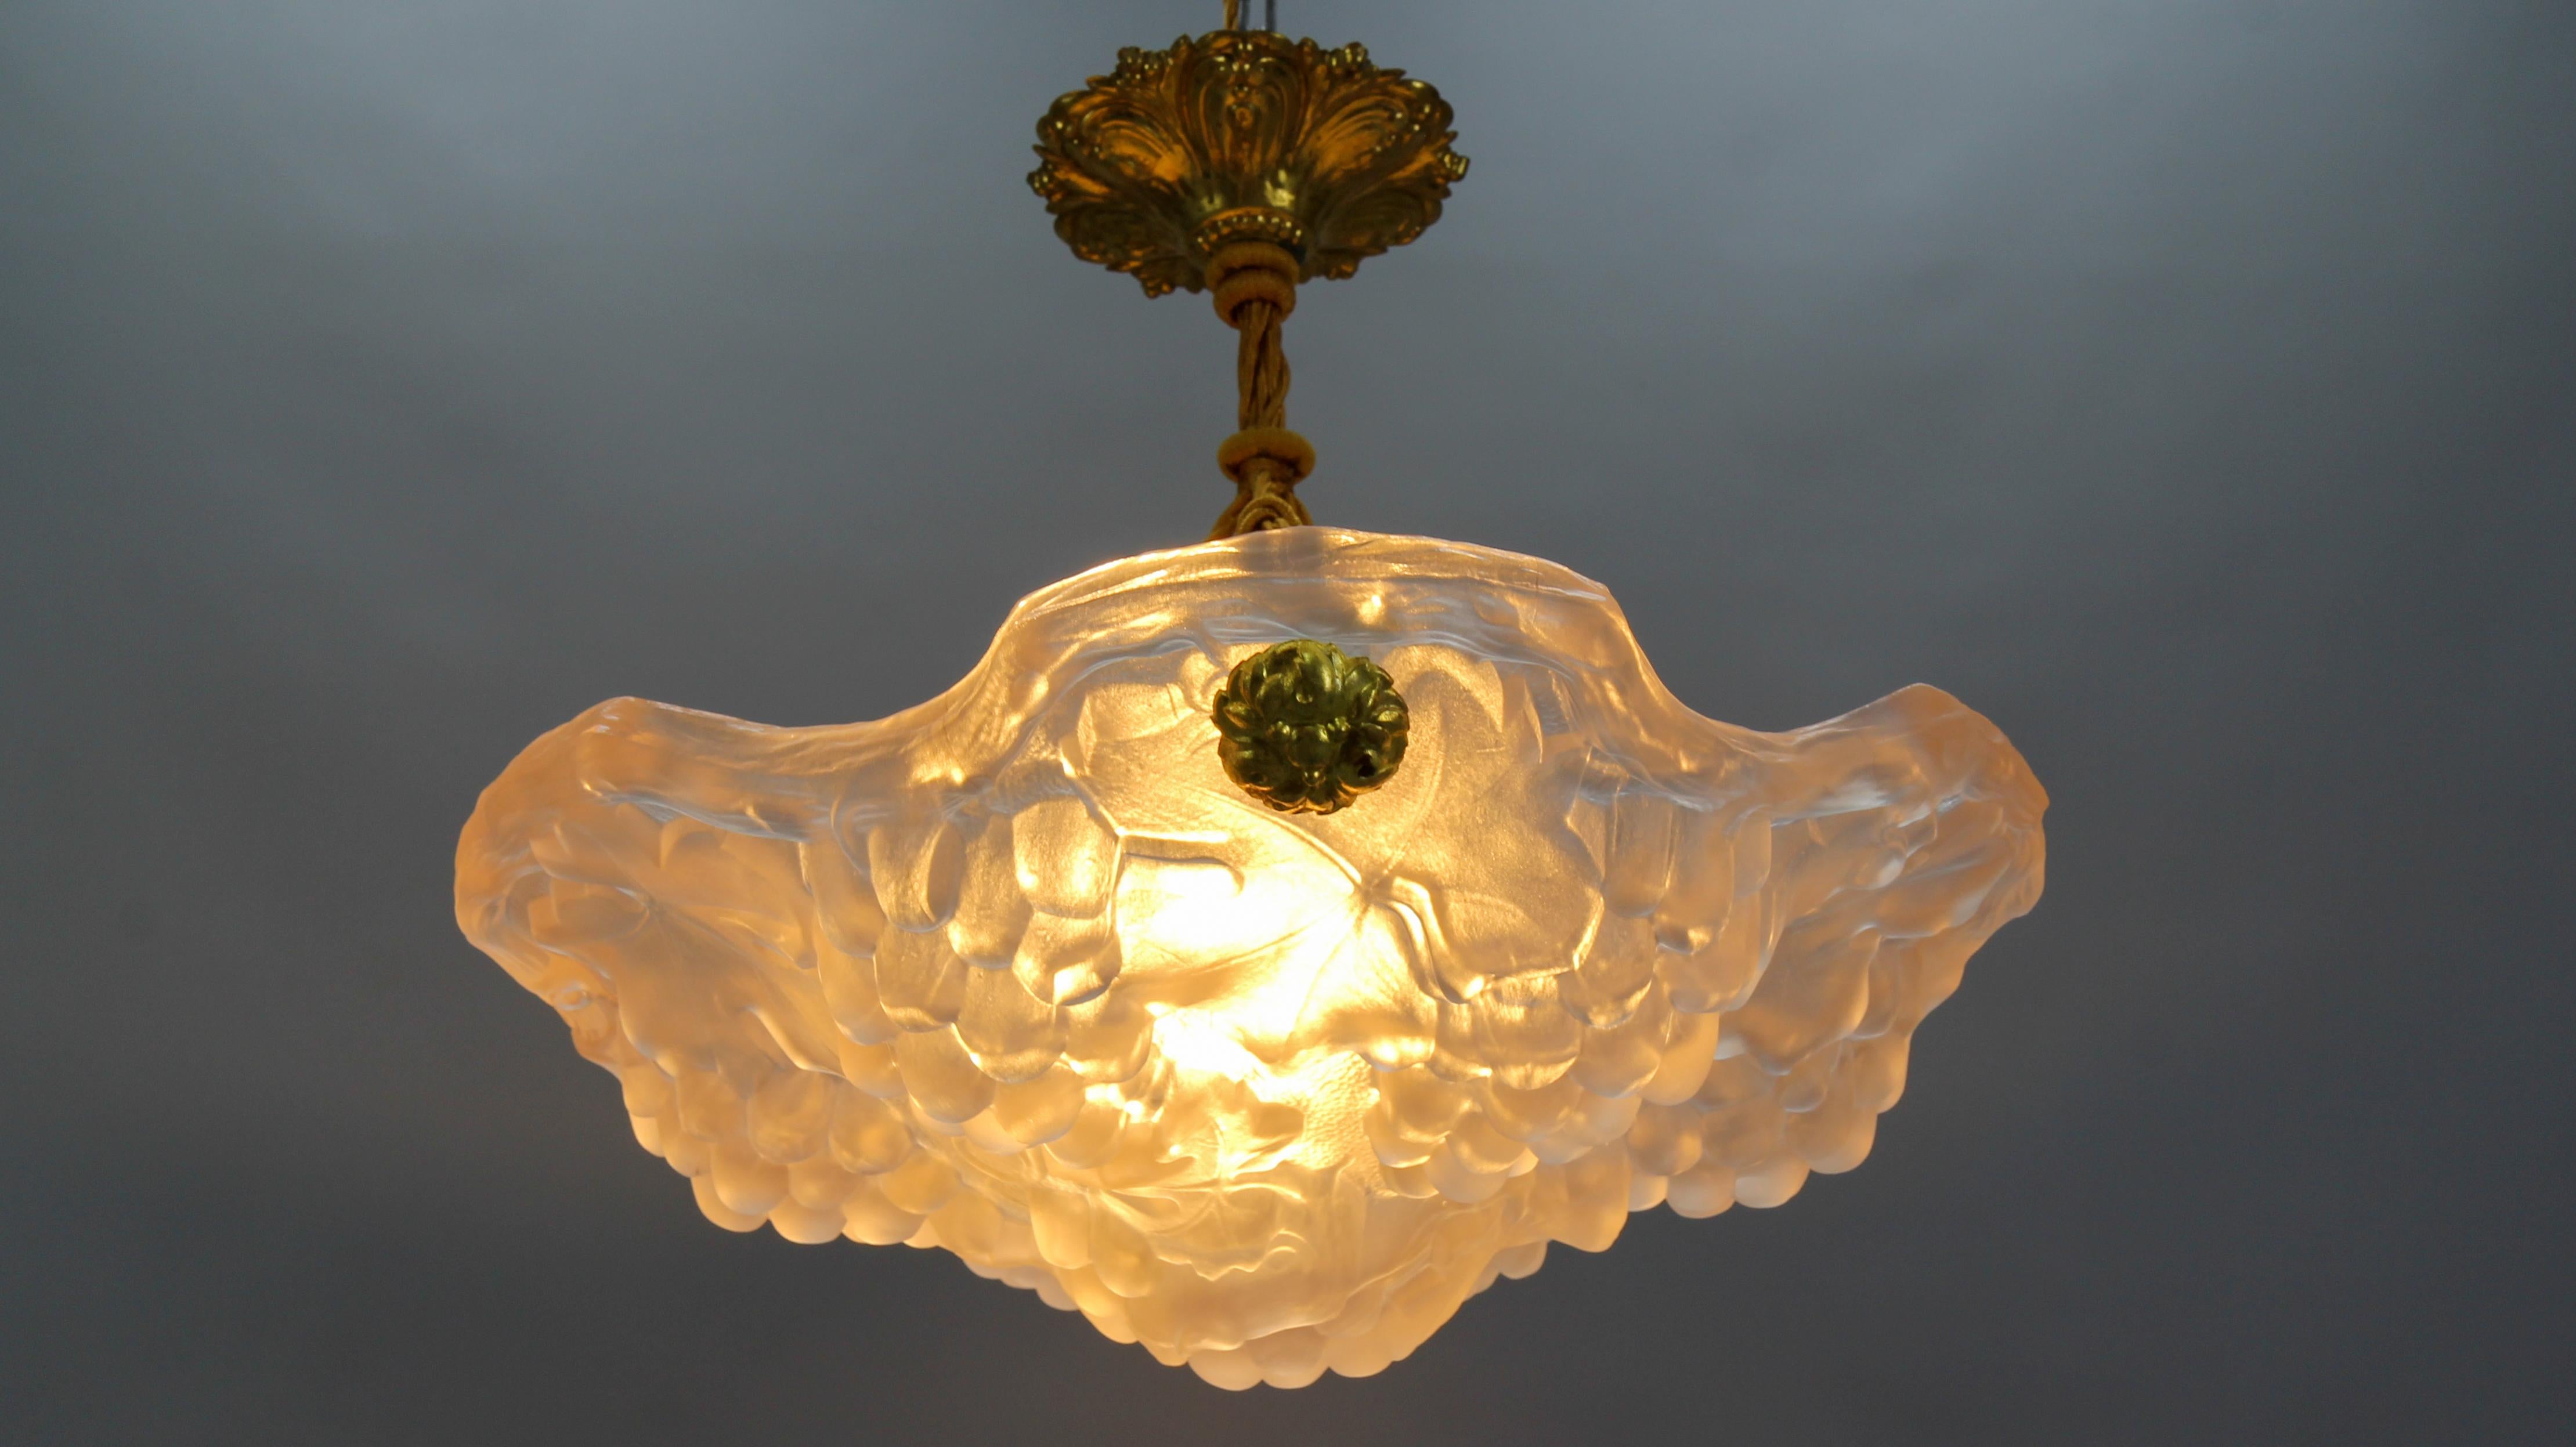 French Light Pink Frosted Glass Pendant Light with Grapes Vines by Verdun, 1930s For Sale 4